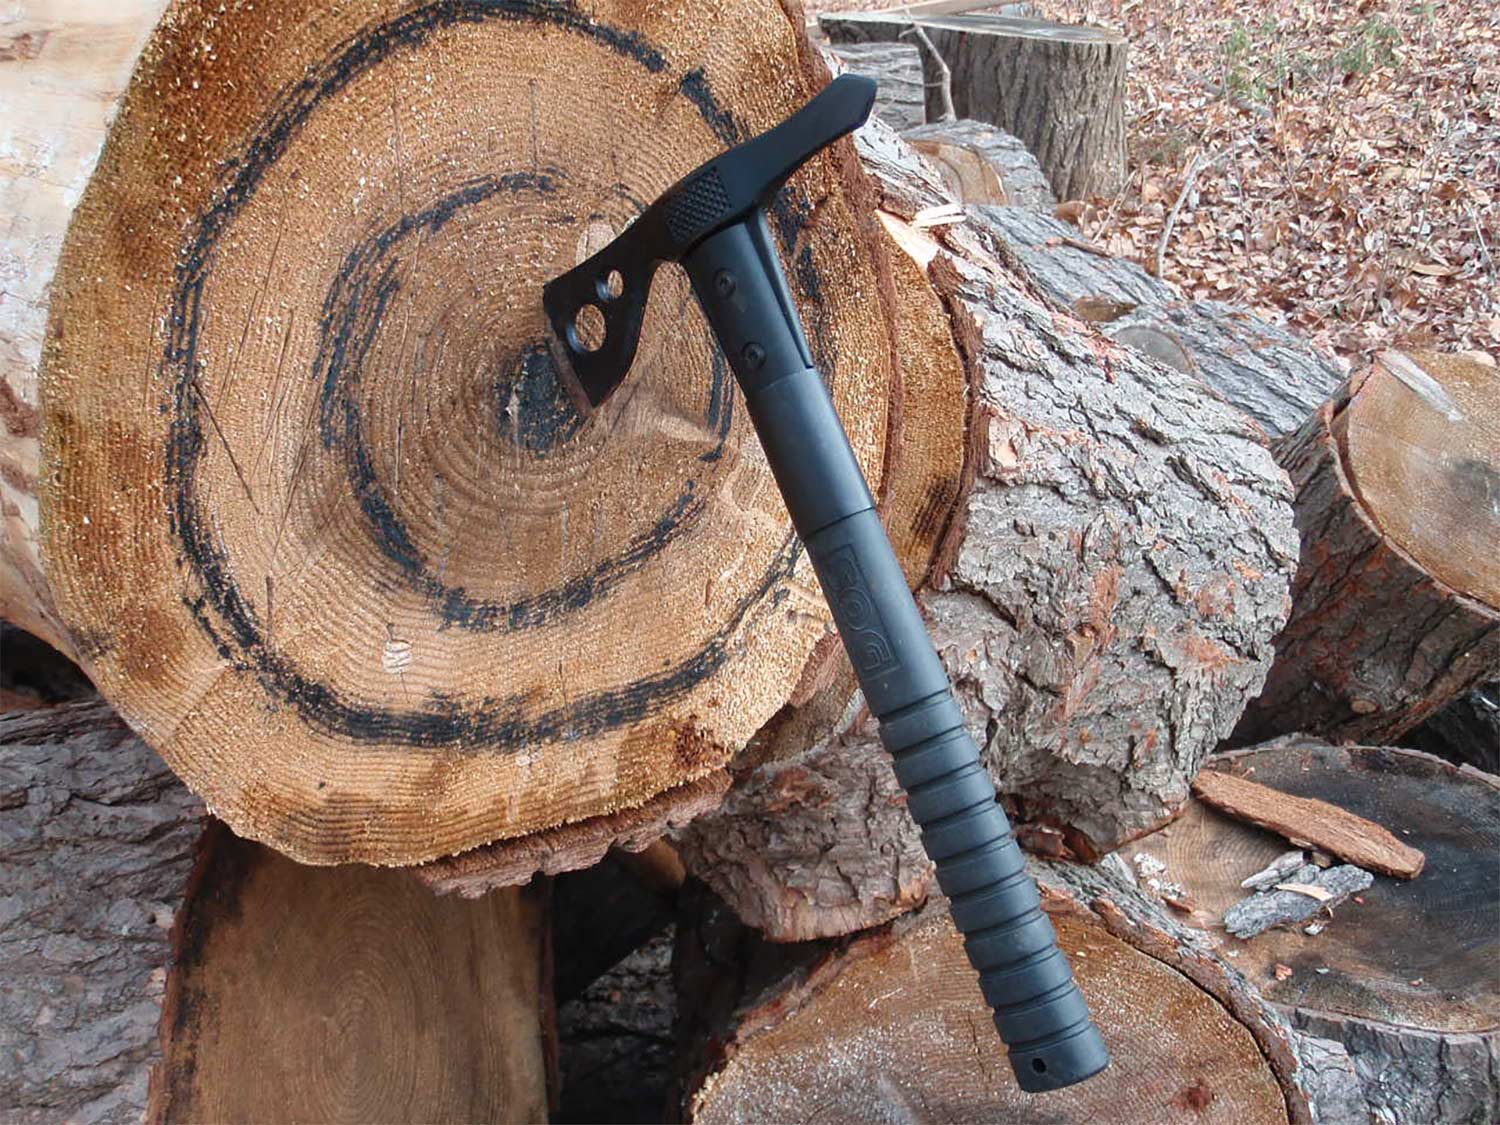 A tactical throwing axe stuck in a tree stump.